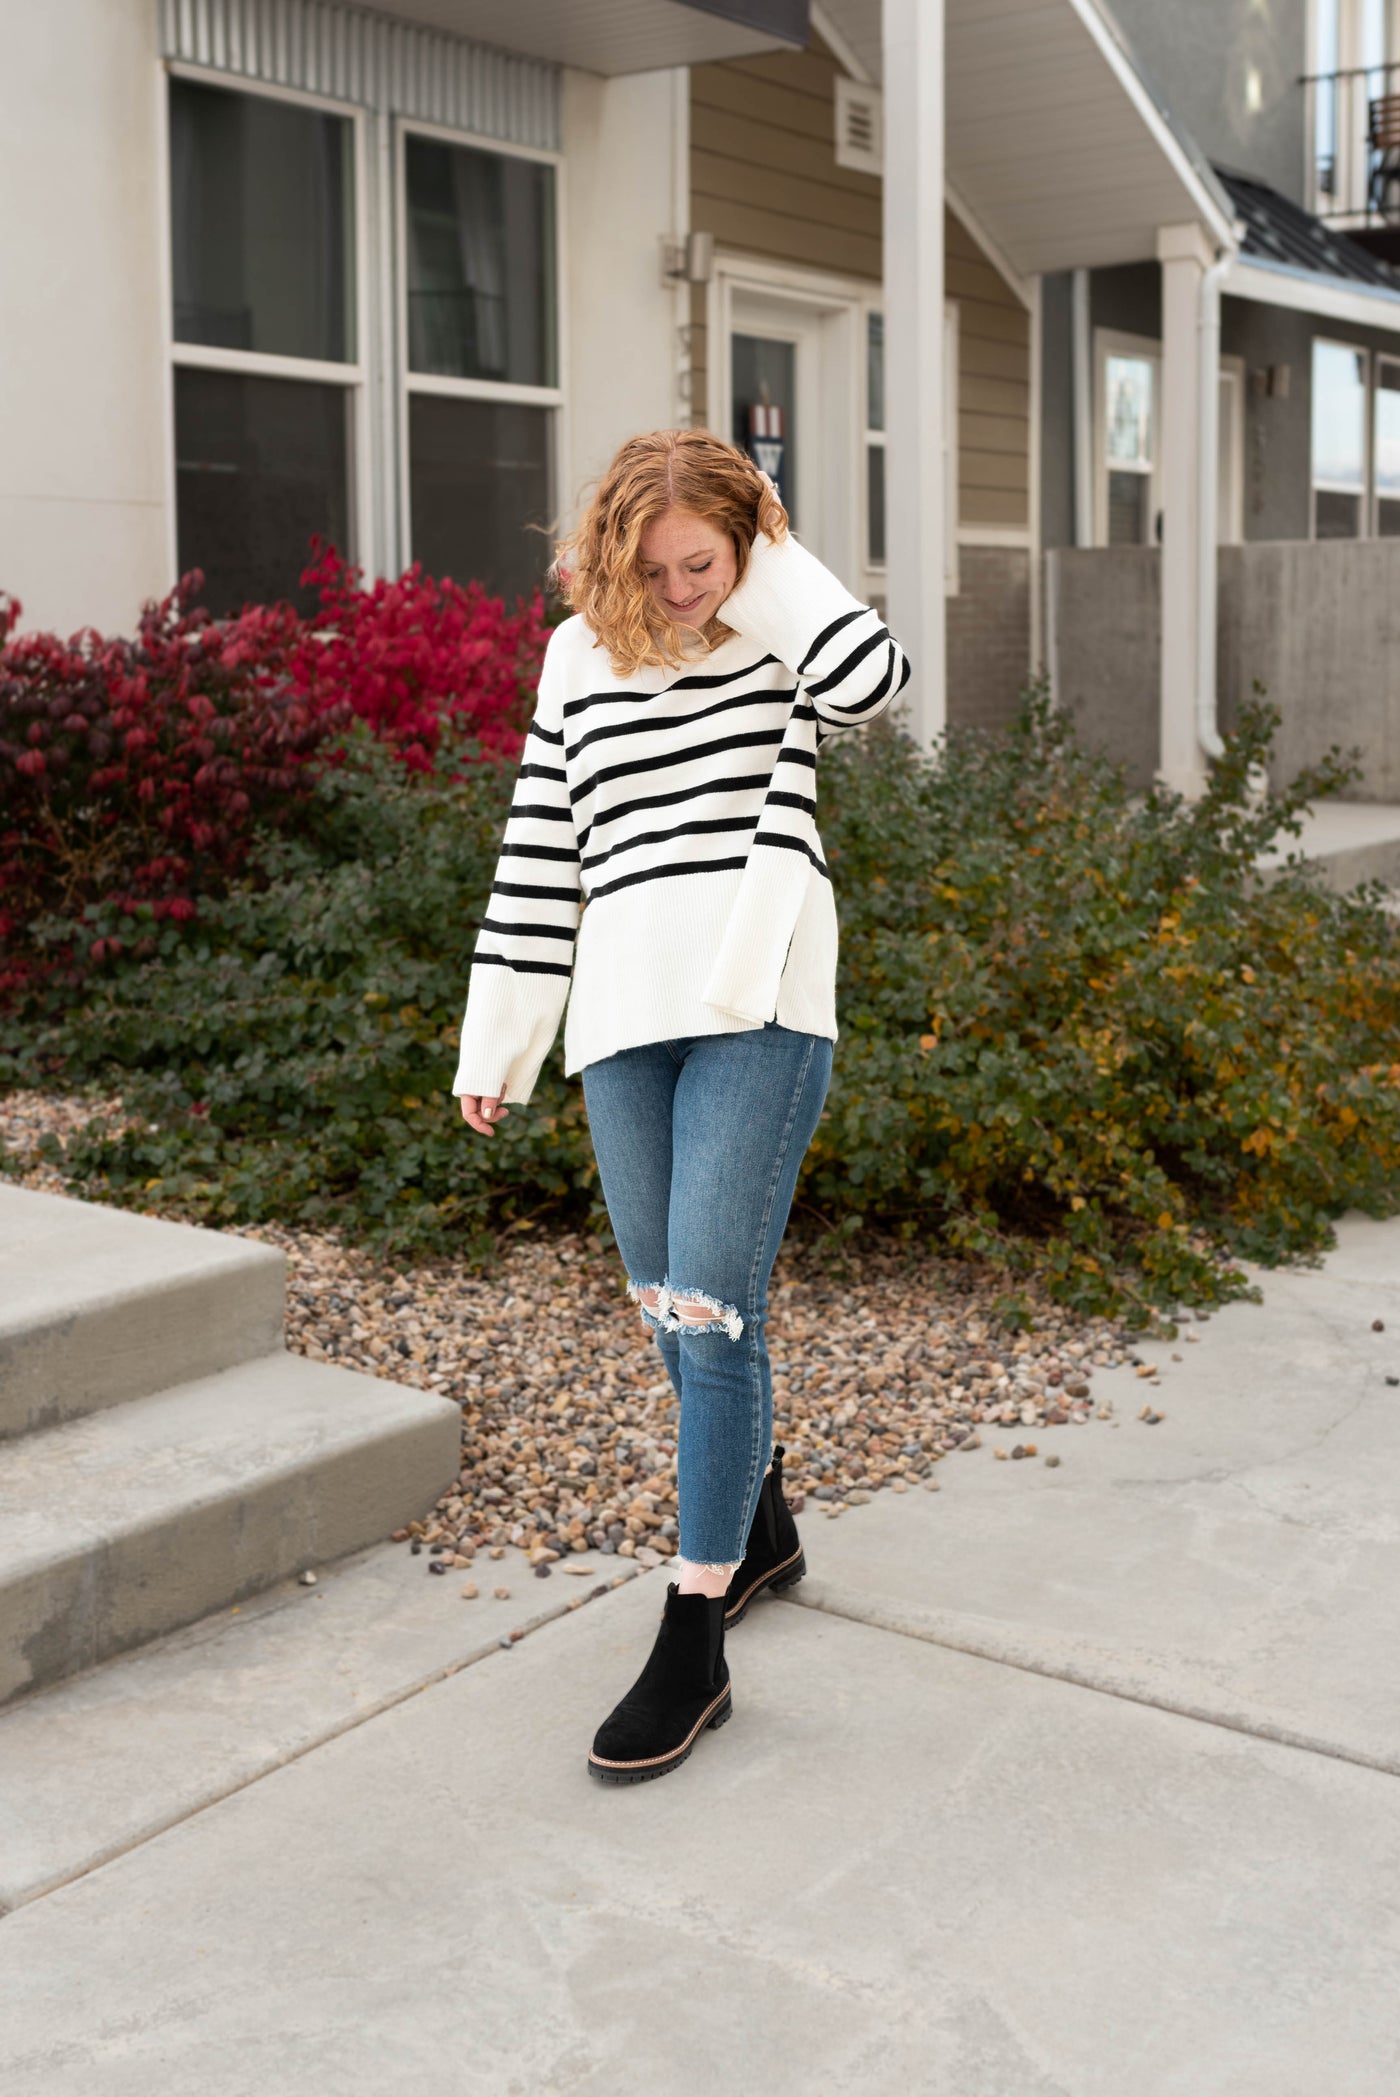 Ivory striped sweater with black stripes